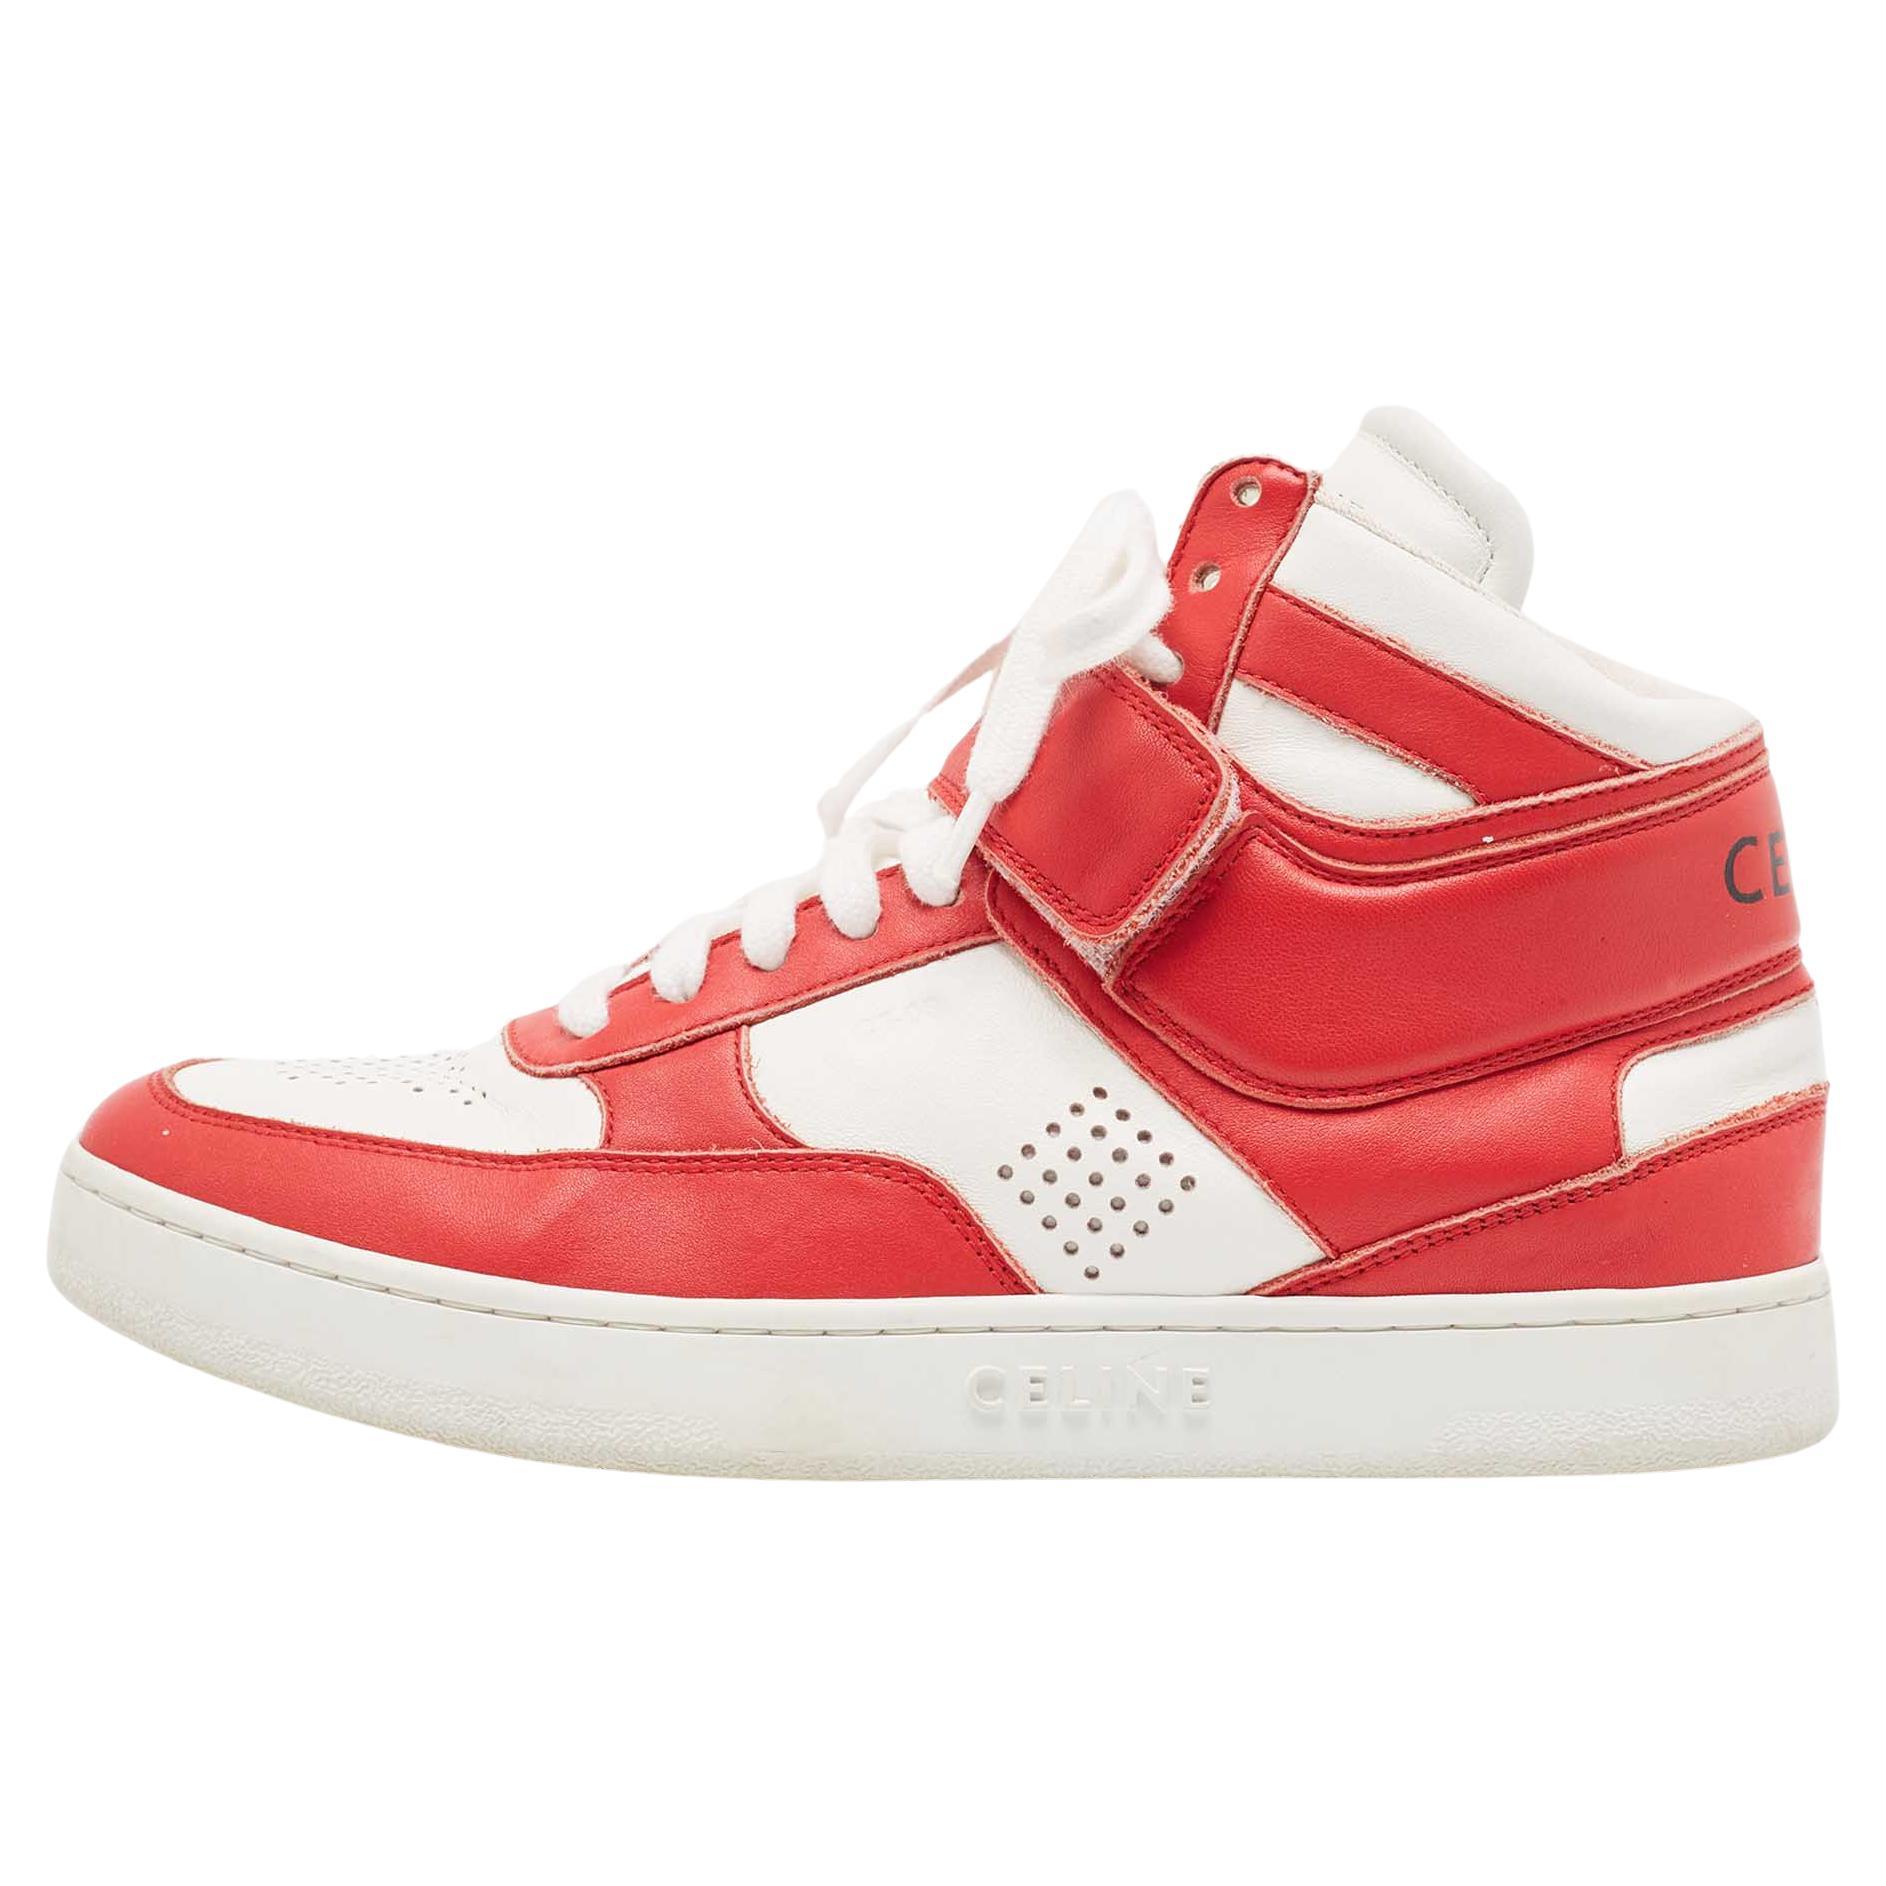 Celine Red/White Leather High Top Sneakers Size 38 For Sale